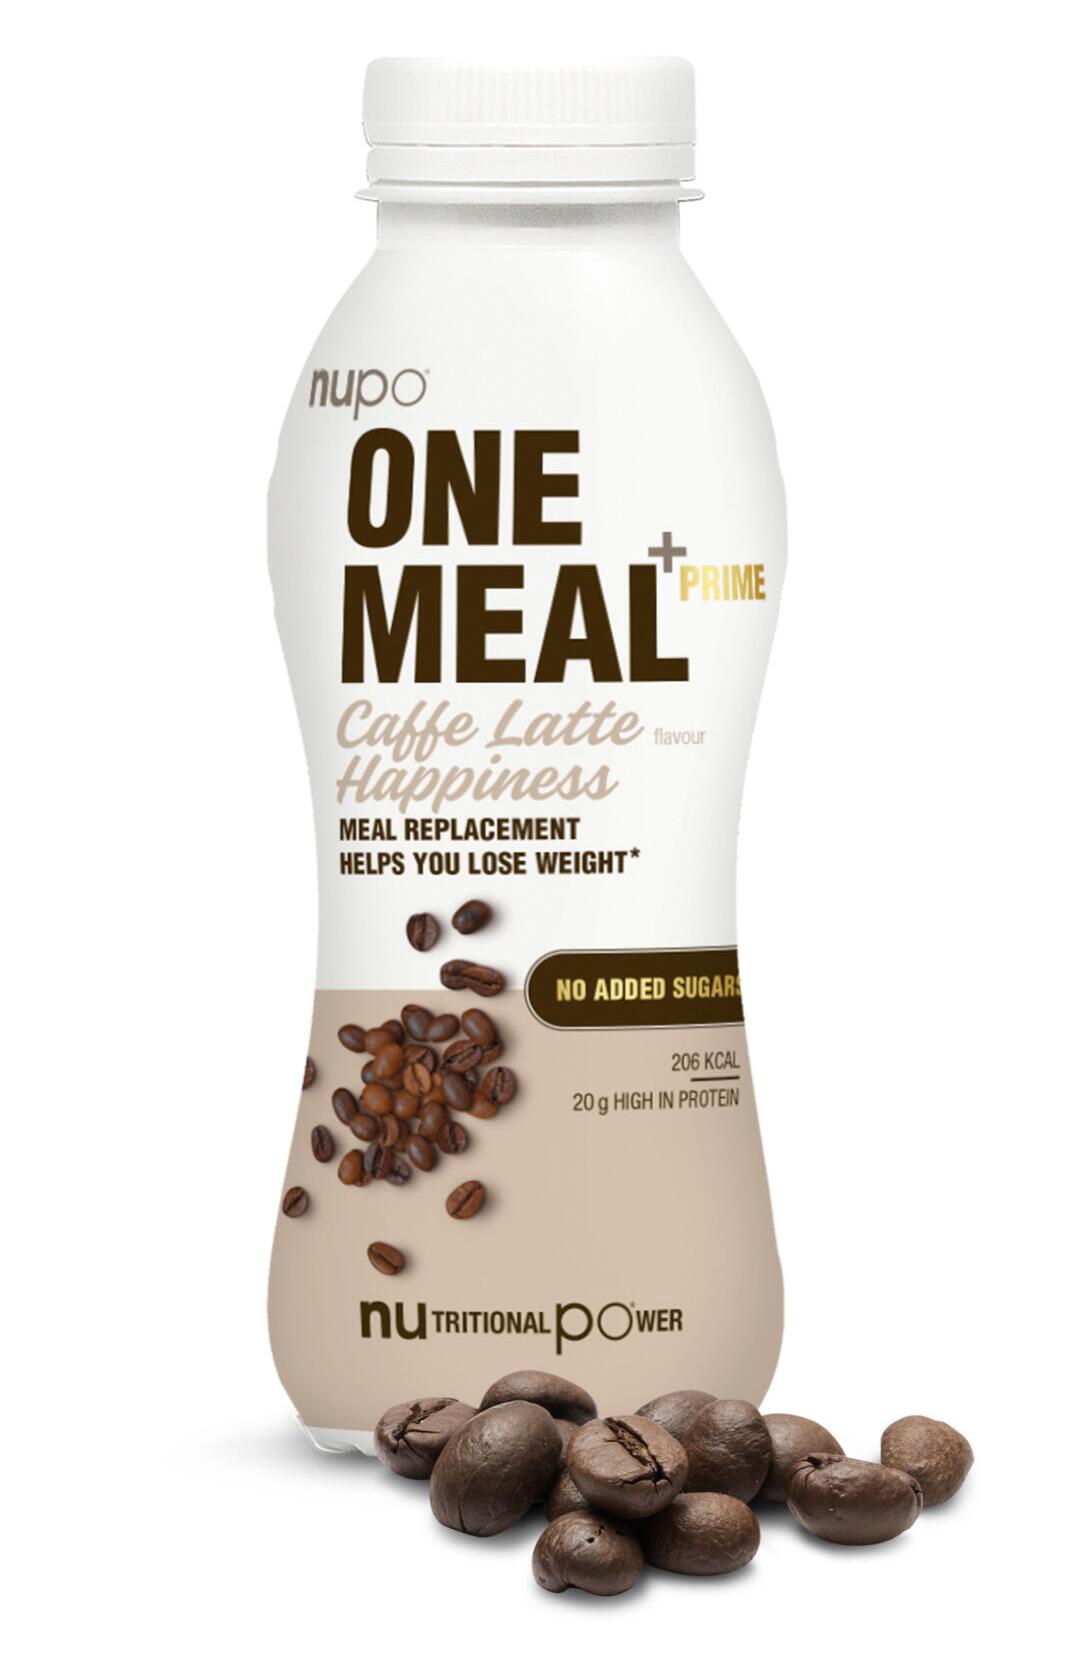 Nupo One Meal +Prime Shake  -  Caffe Latte Happiness, 330ml.